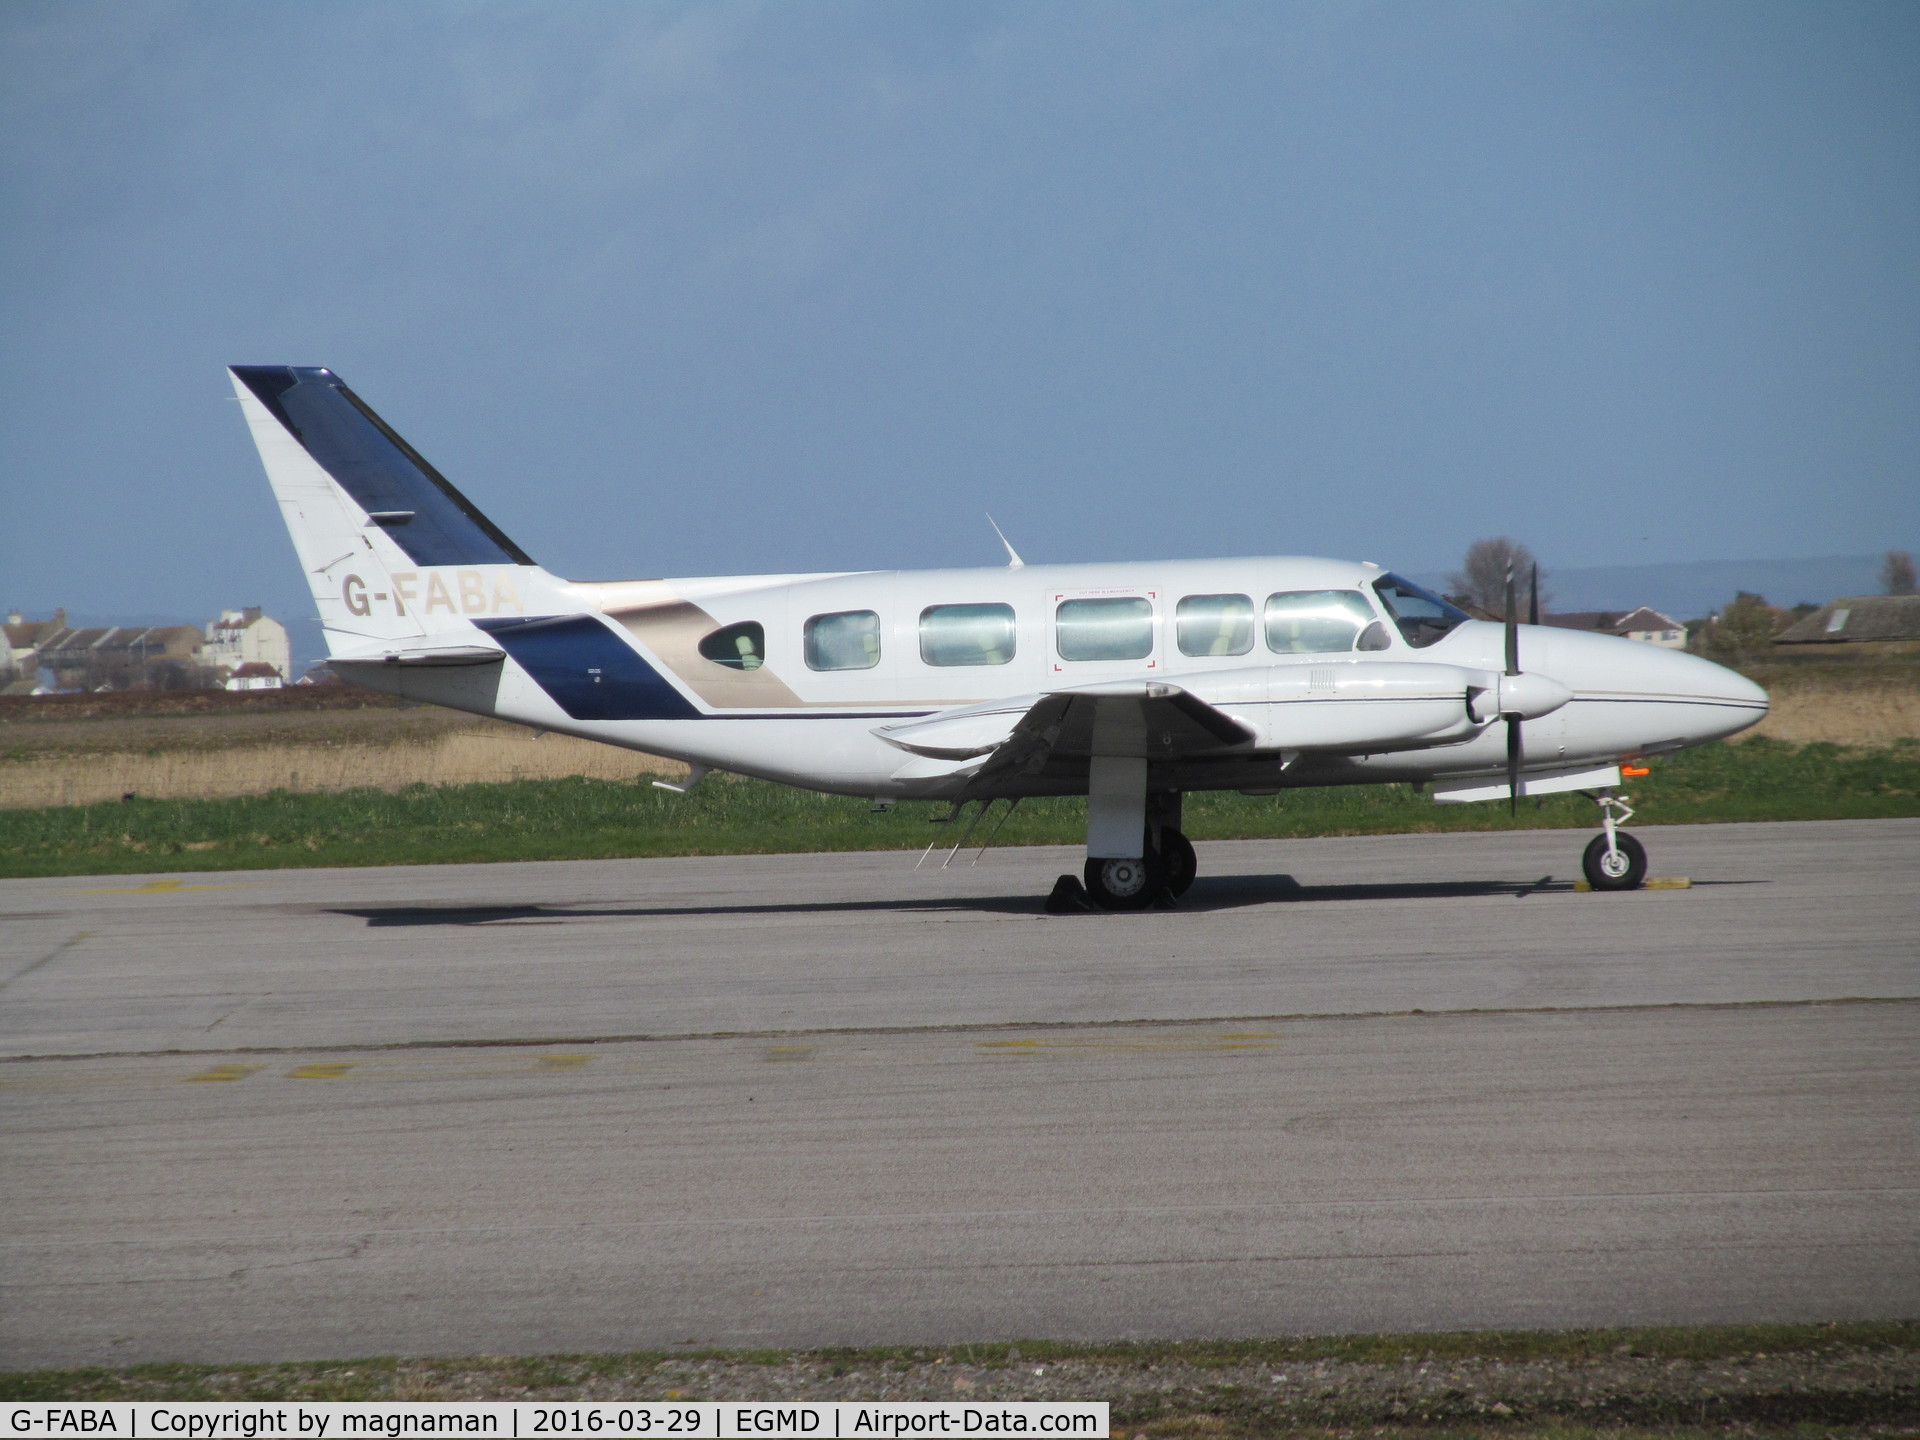 G-FABA, 1976 Piper PA-31-350 Navajo Chieftain Chieftain C/N 31-7652175, at Navajo heaven - lydd - three on apron today